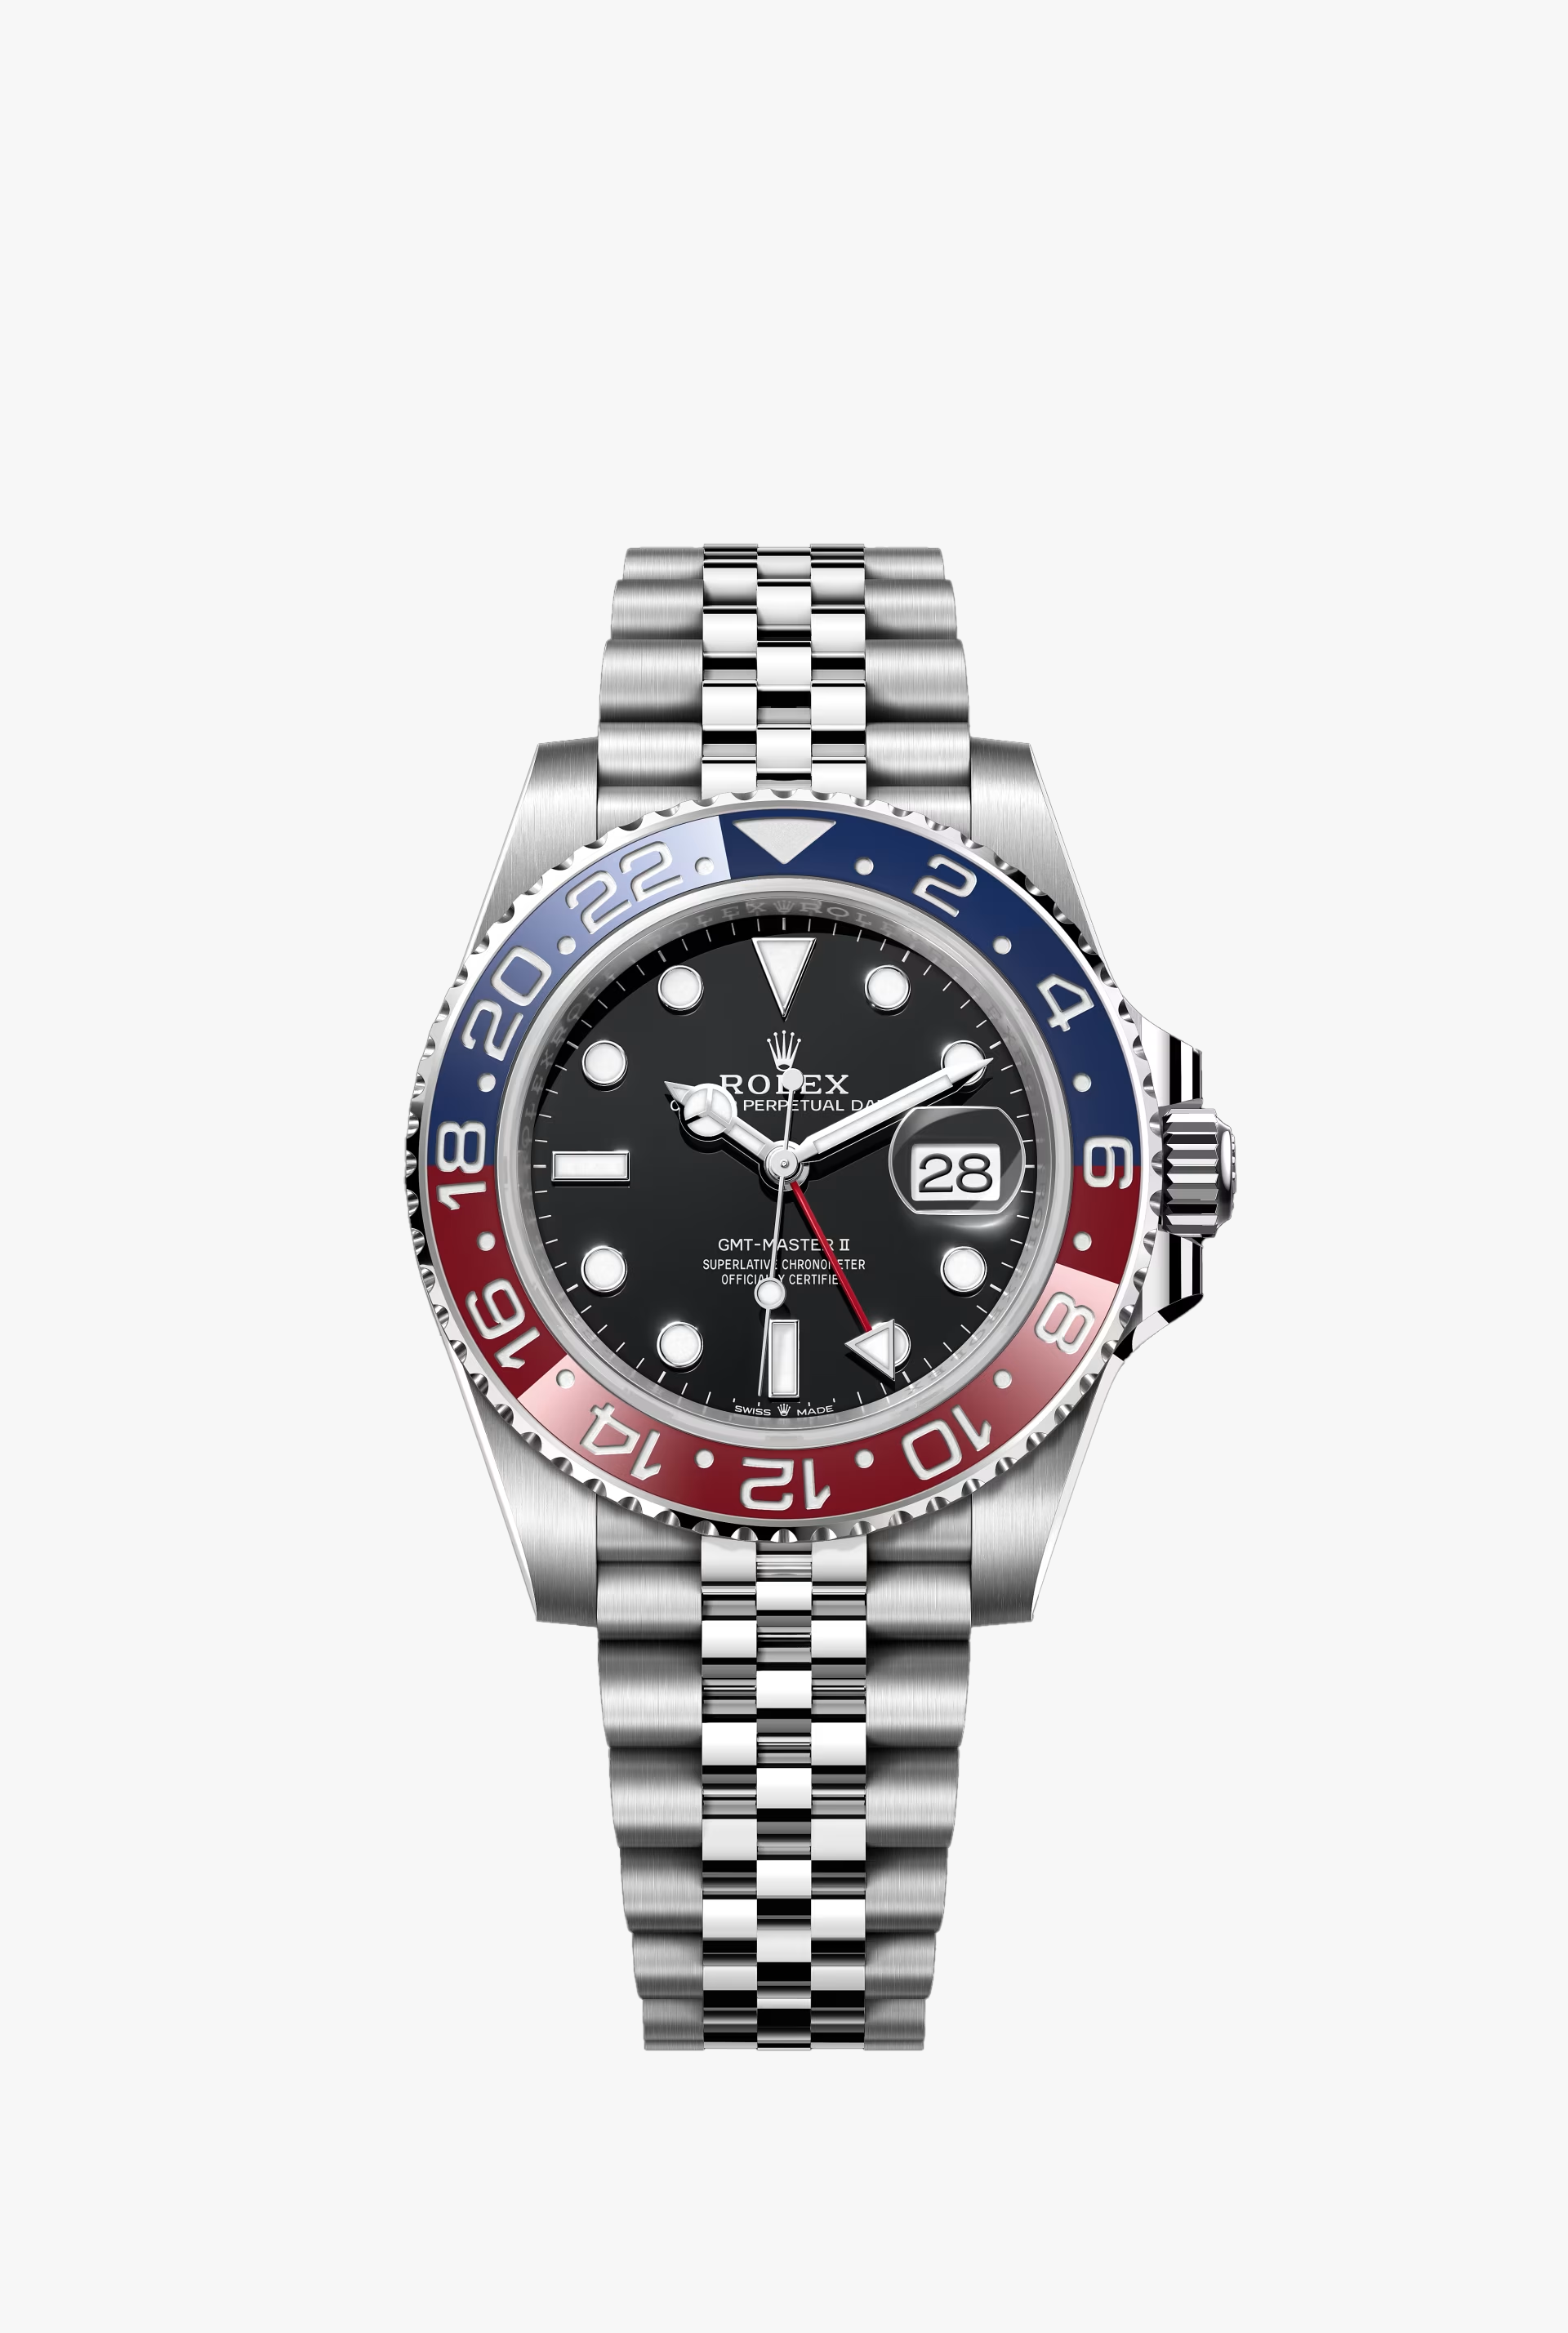 Rolex GMT-Masterl Oyster,40 mm, Oystersteel Reference 126710BLRO